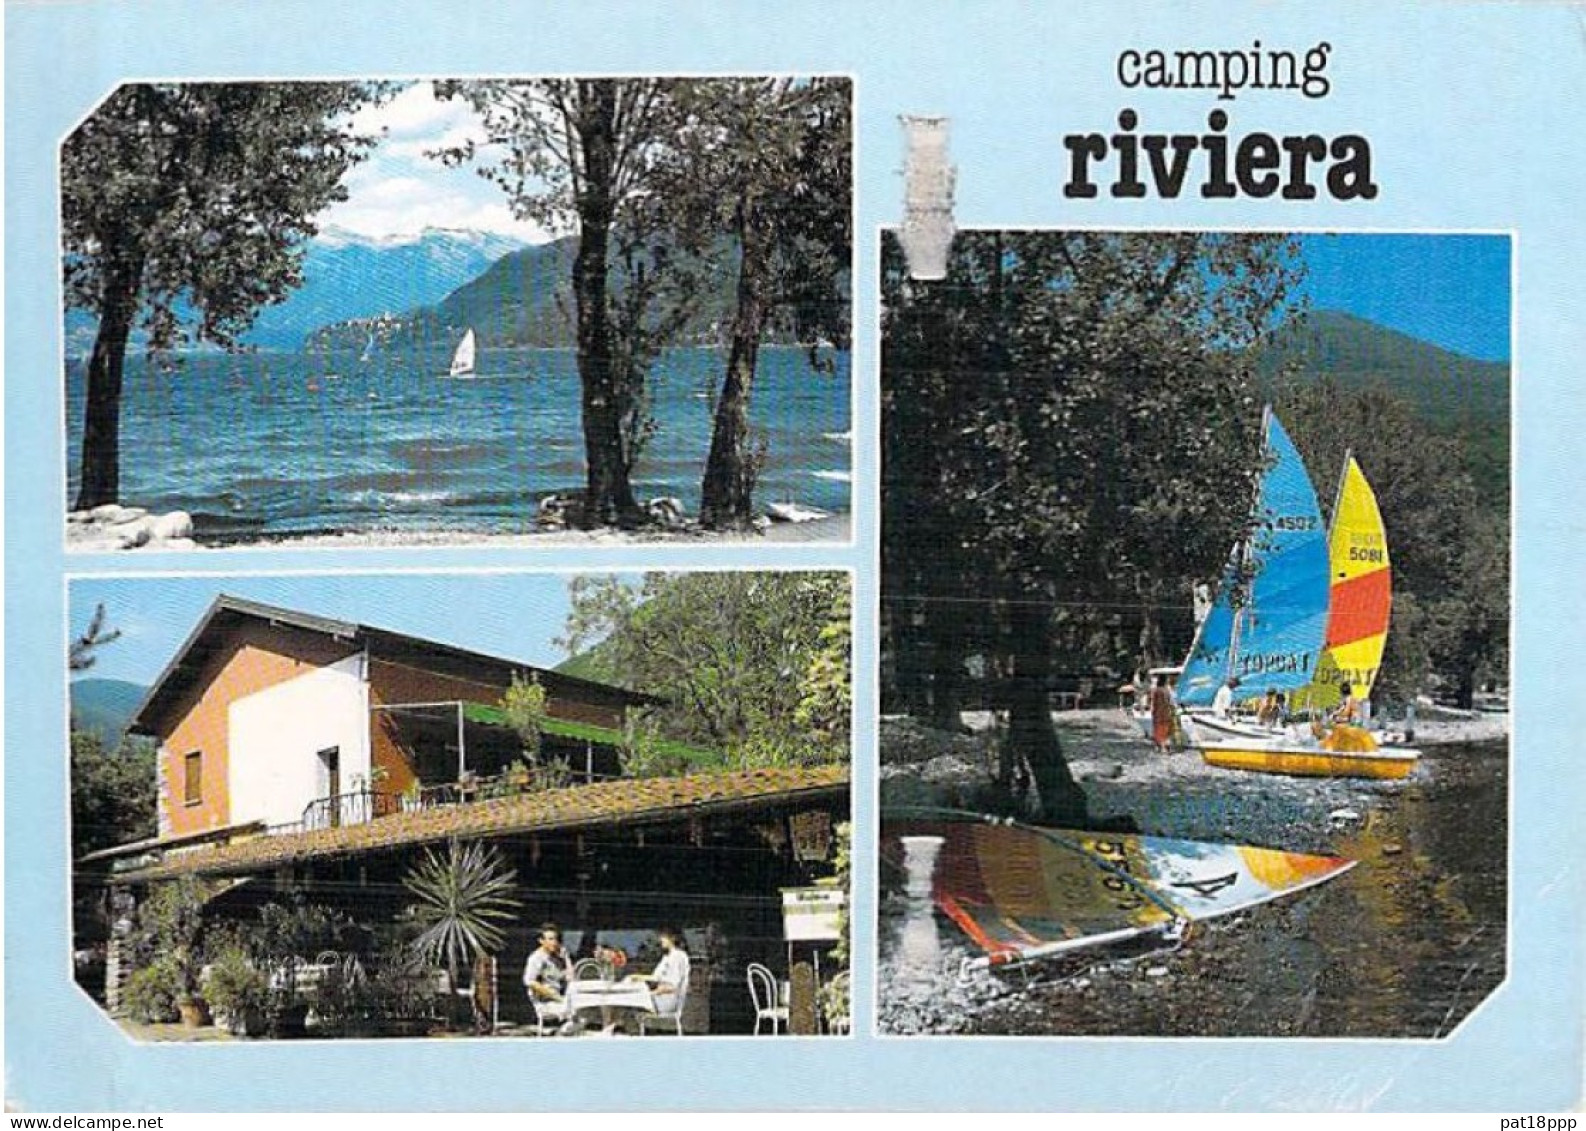 FRANCE - Lot de 50 CPSM-CPM : CAMPING Europe (hors France) dont 13 Netherlands Pays Bas (0.10 € / carte)